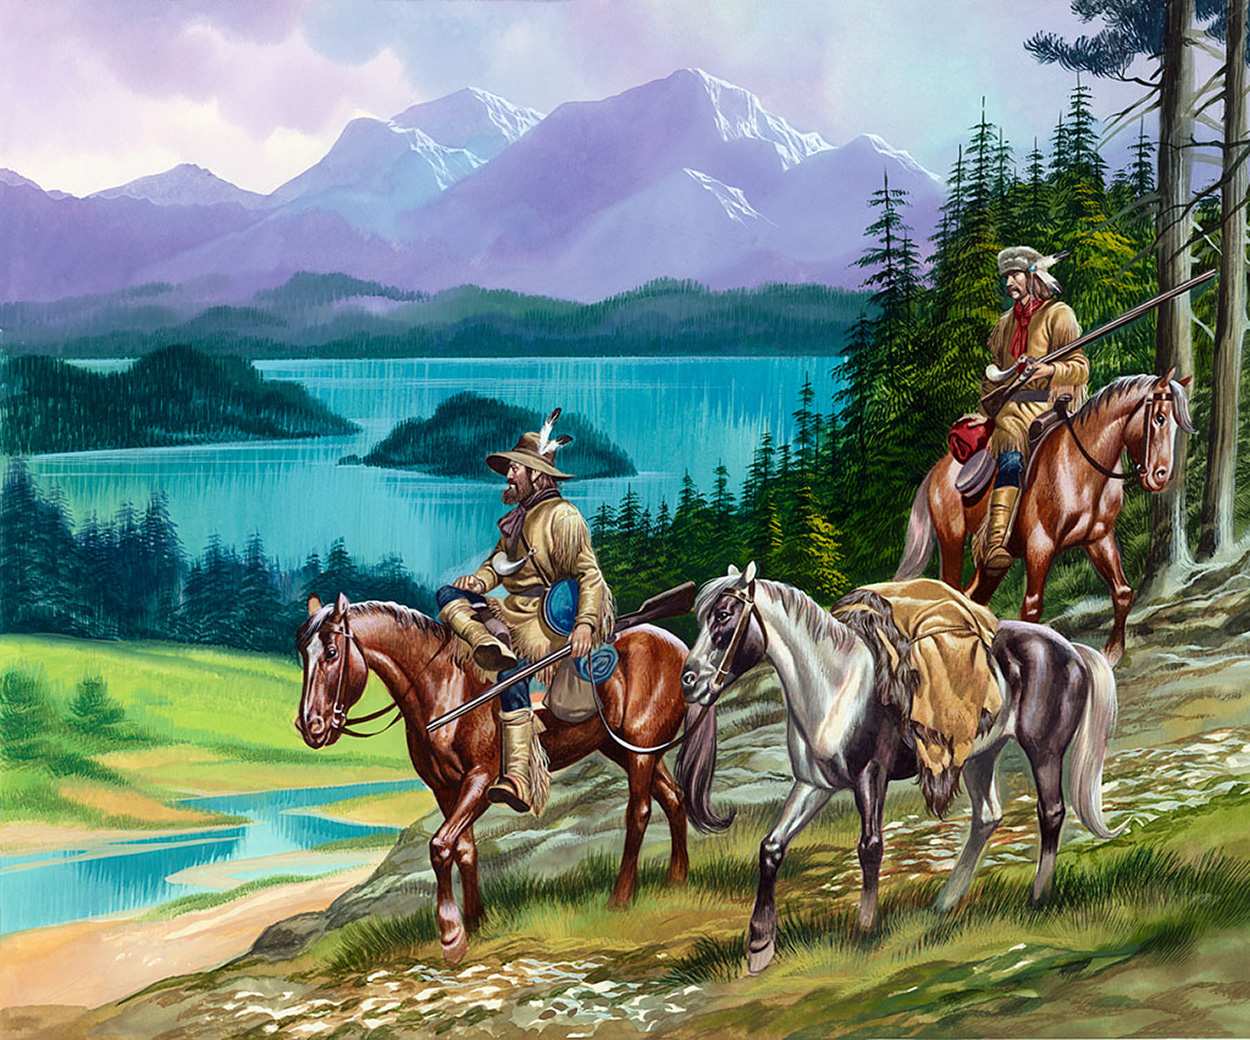 The Mountain Men Trappers (Original) art by The Winning of the West (Ron Embleton) at The Illustration Art Gallery